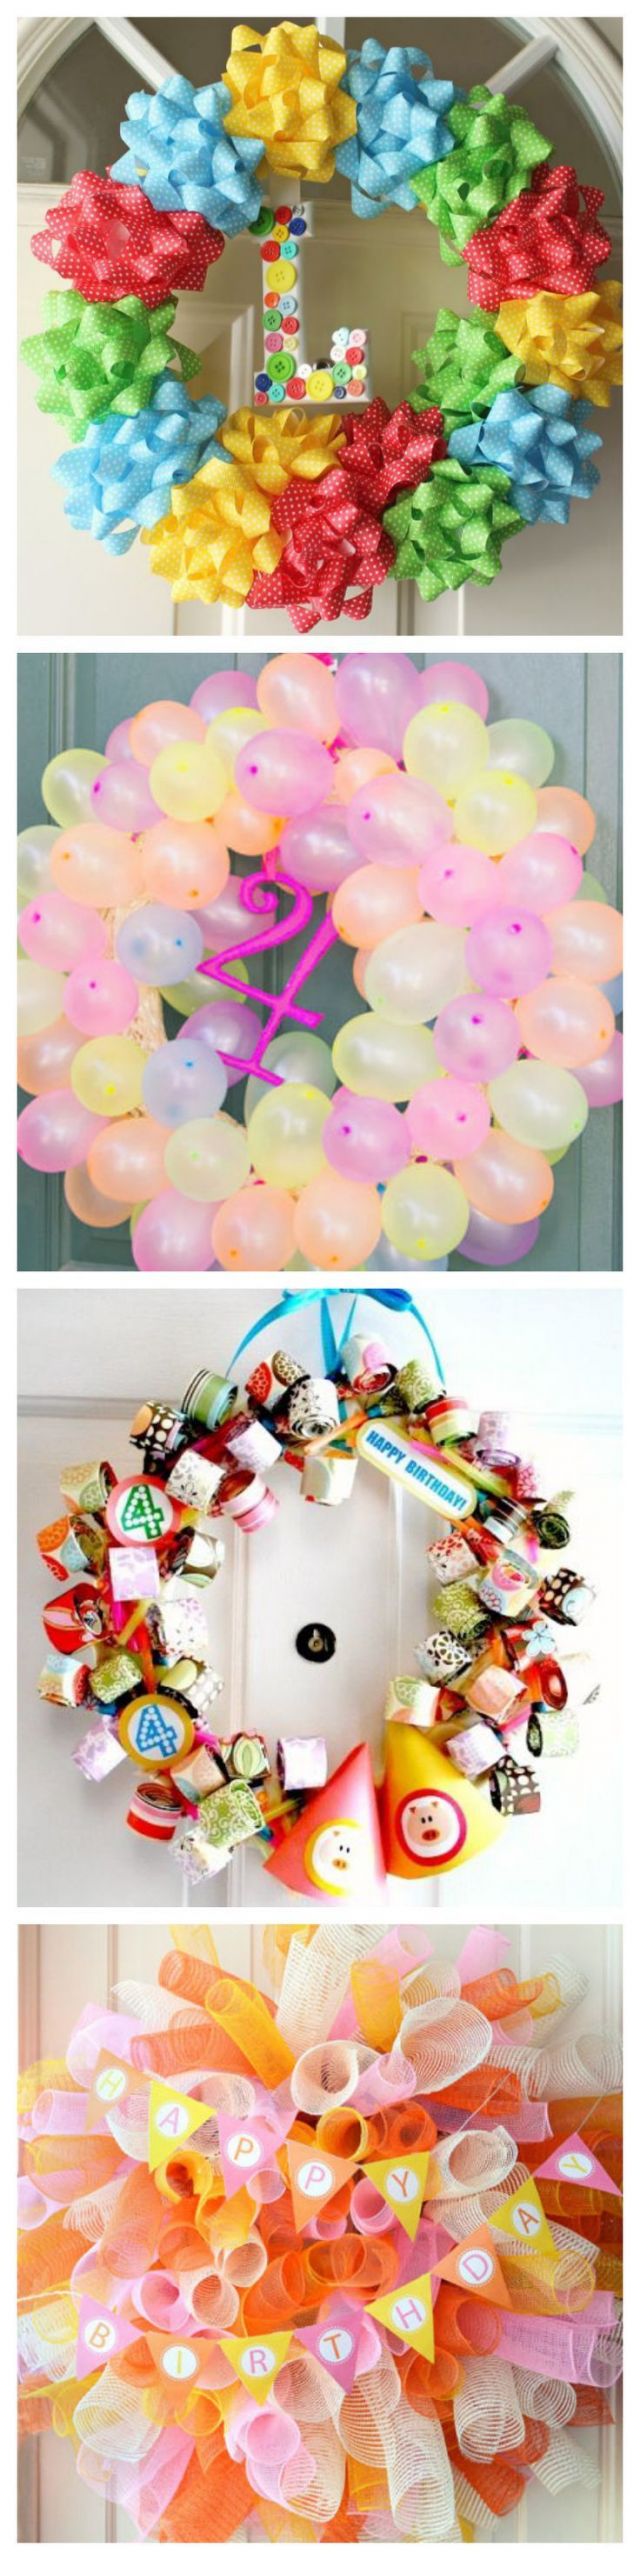 Homemade Birthday Party Decorations
 9 Birthday Wreaths That Are Just Too Cute